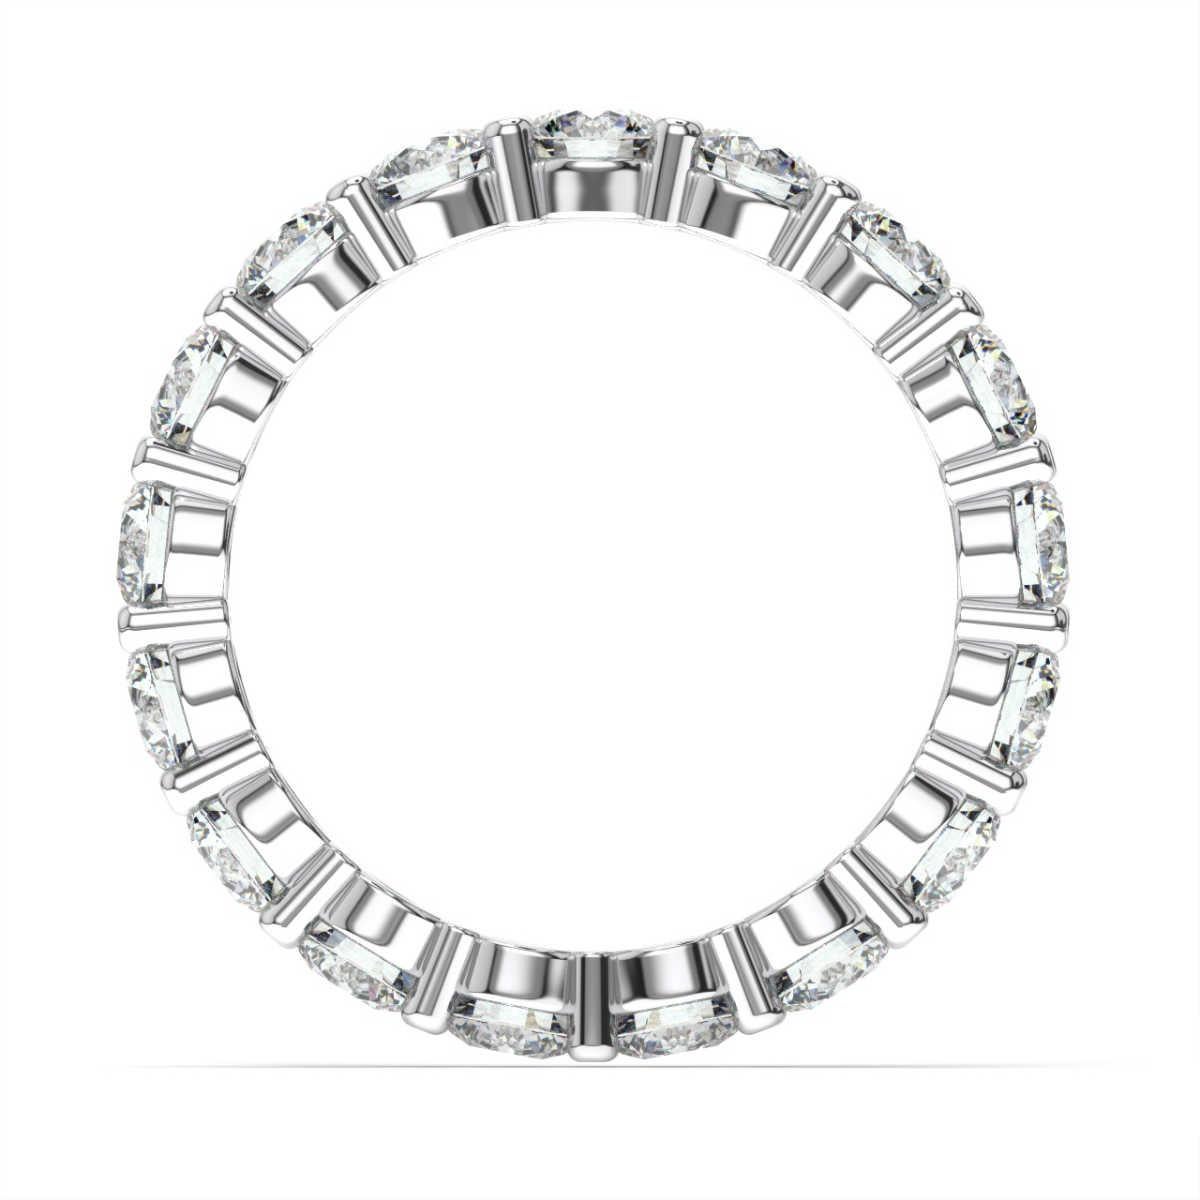 Timeless and classic. This eternity band features a perfectly matched round brilliant diamonds shared prong set. Experience the difference!

Product details: 

Center Gemstone Color: WHITE
Side Gemstone Type: NATURAL DIAMOND
Side Gemstone Shape: